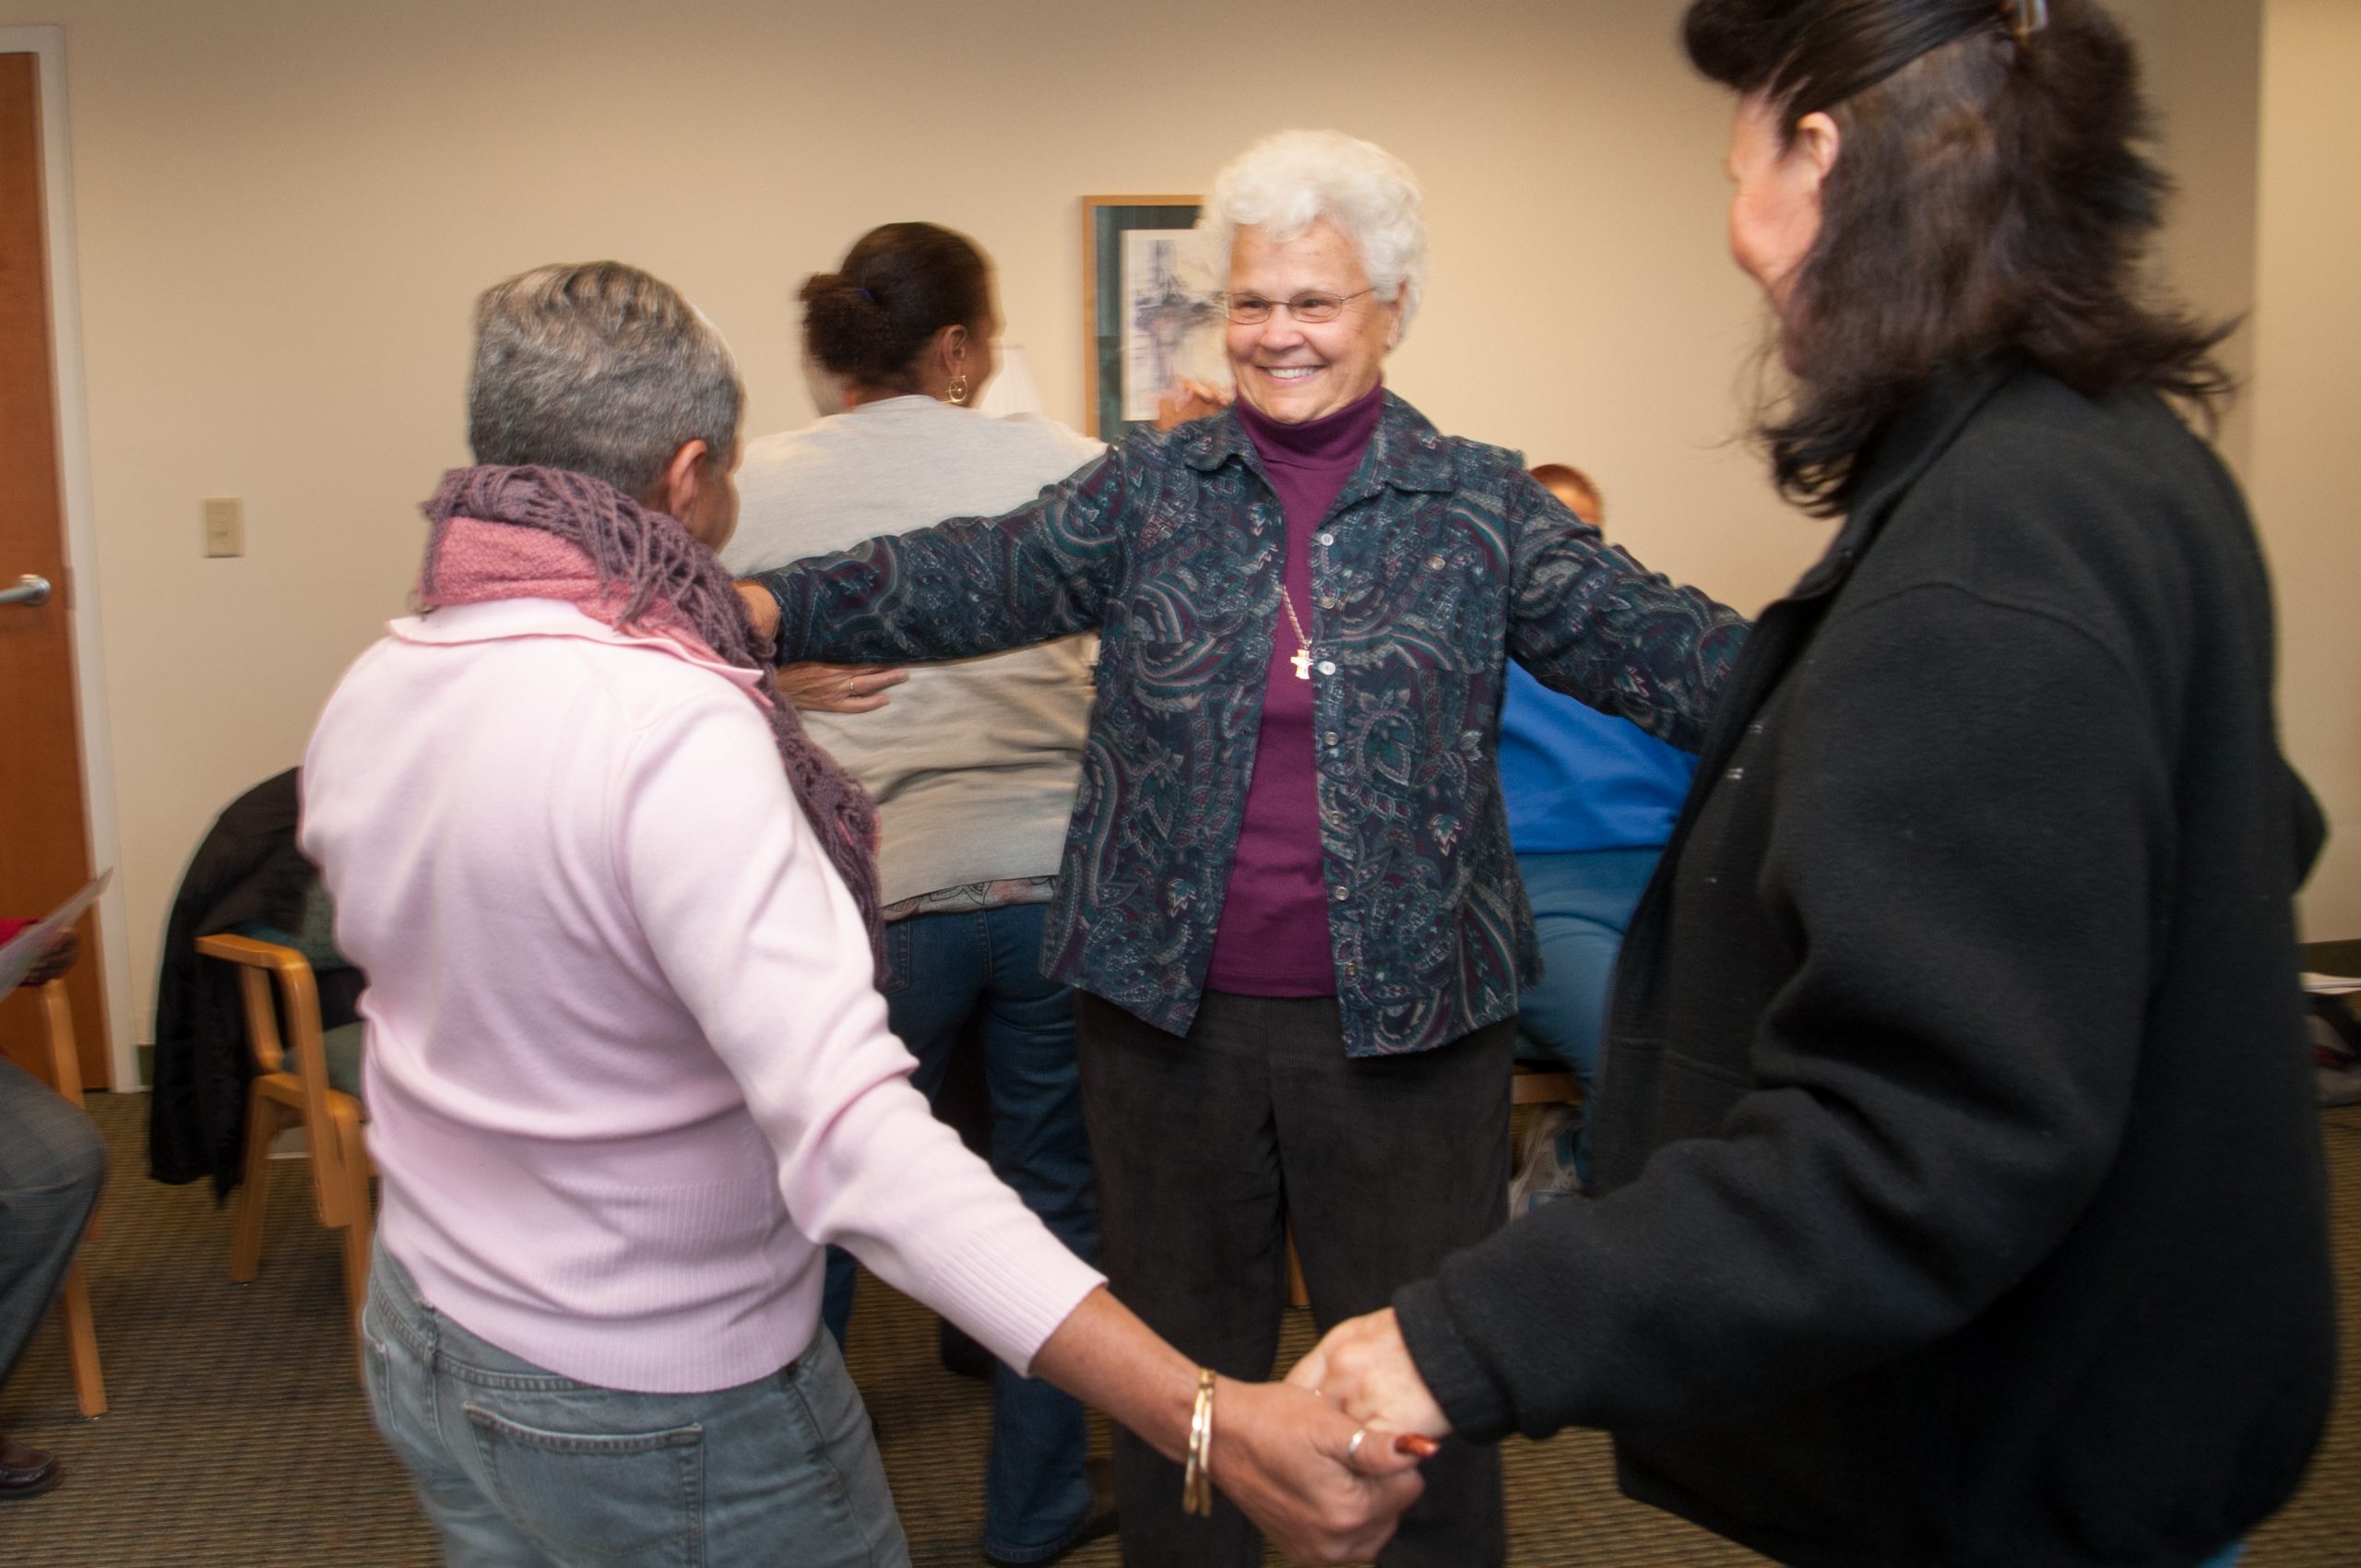 Sister Eileen dances with women who are homeless during a retreat at Mercy by the Sea in Madison, Connecticut. Credit: Catherine Walsh.